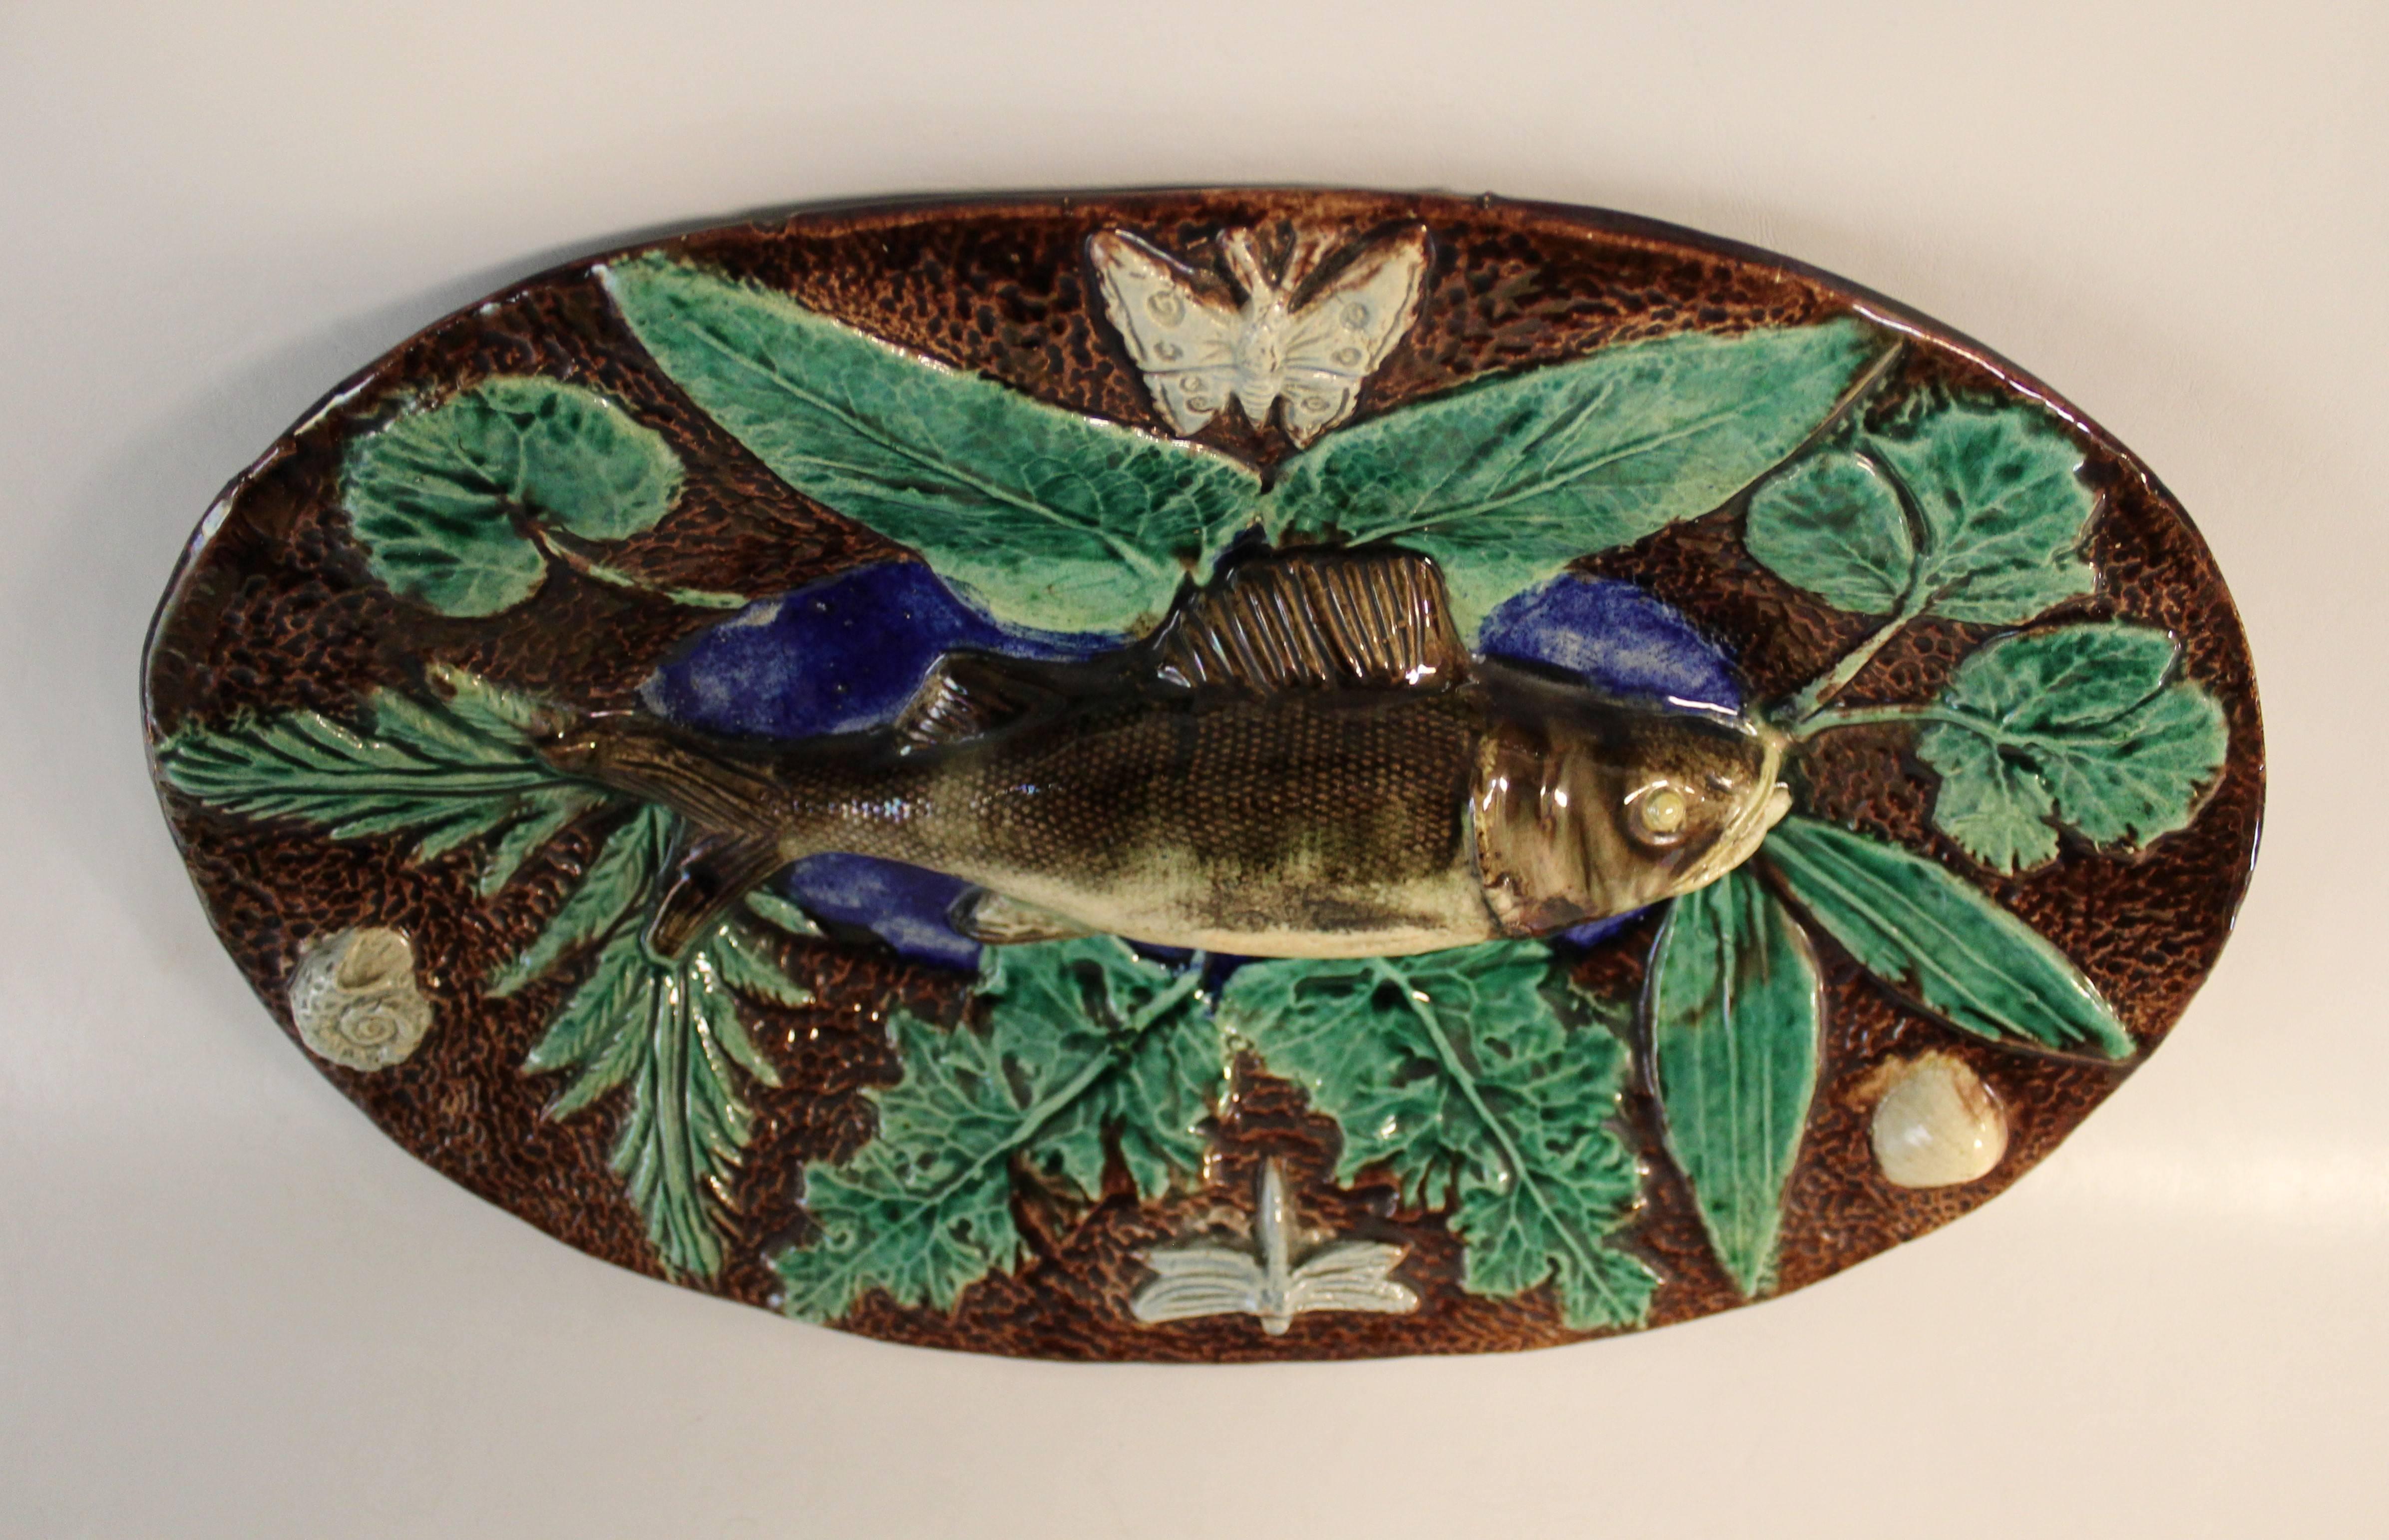 School of Paris Francois Maurice signed Majolica Palissy Ware fish wall platter. The school of Paris is composed of ceramic artists such as Victor Barbizet, Francois Maurice, Thomas Sergent and Georges Pull. They all produced Palissy pieces at the